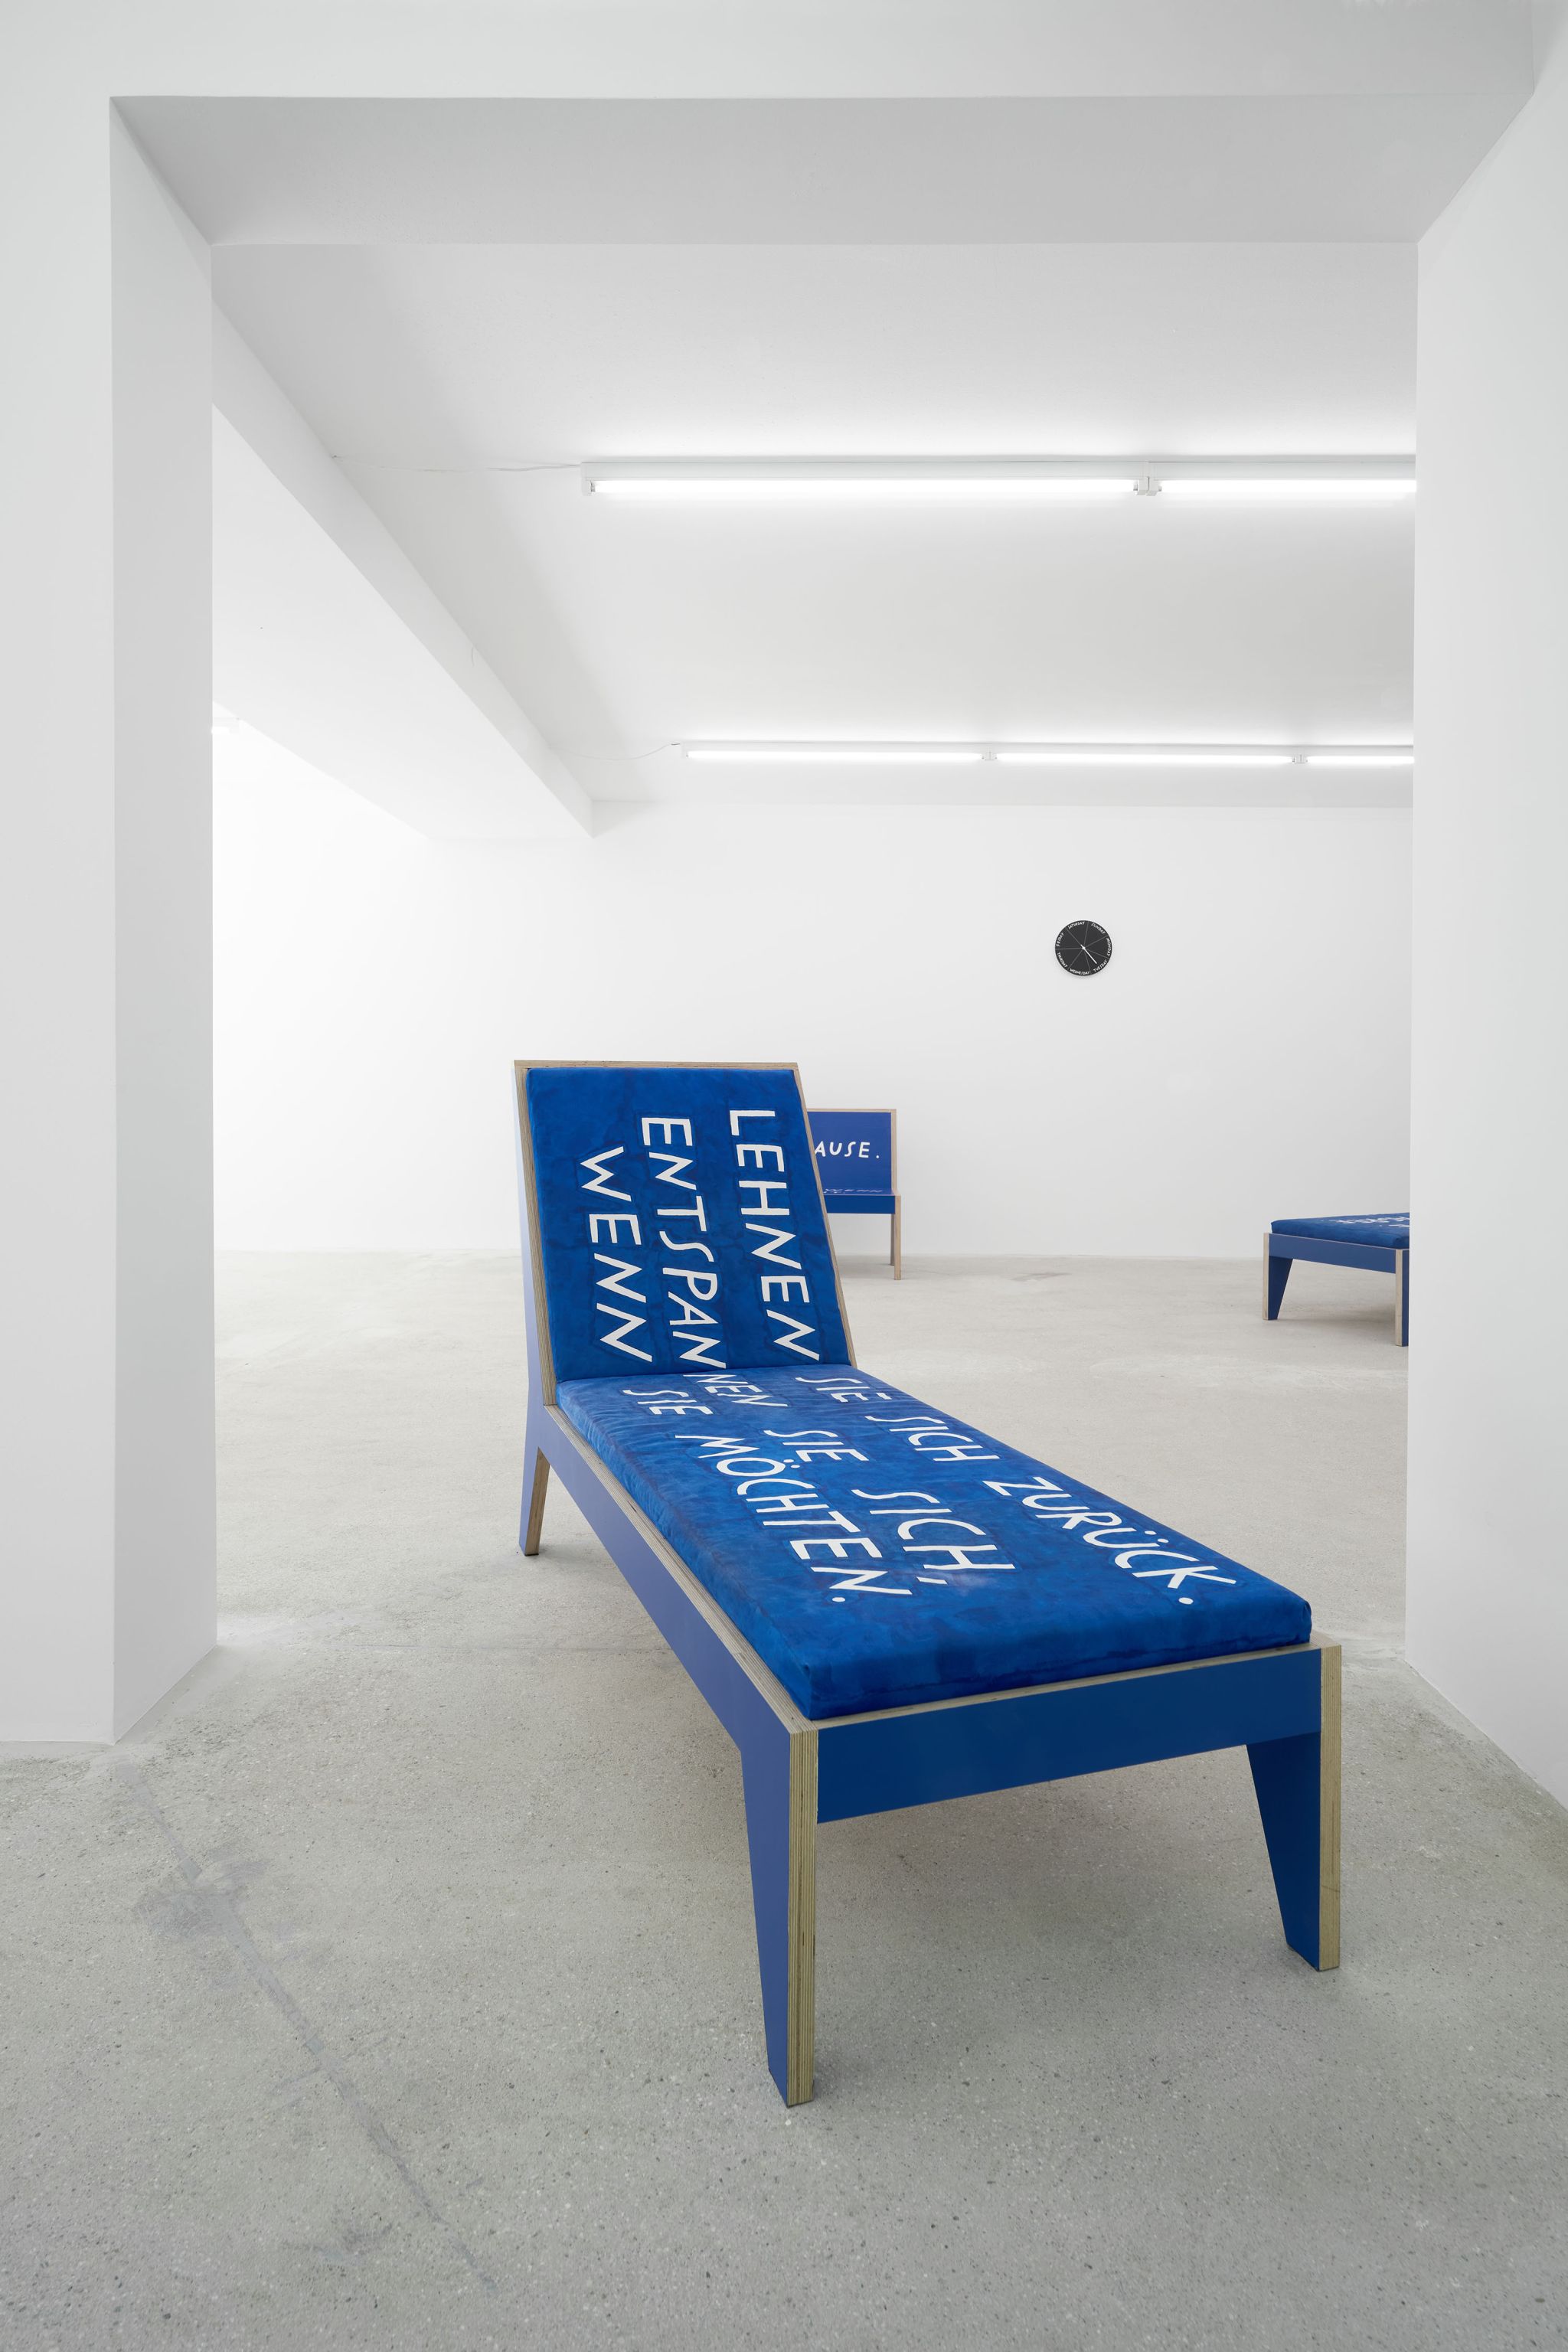 Finnegan Shannon, Do you want us here or not (MMK) – Chaise lounge 1, 2021, Plywood, paint, foam, fabric, fabric paint, 110.5 ⁠× ⁠190 ⁠× ⁠68.5 ⁠⁠cm, Image description: Two blue chaise lounges and a blue bench are in an exhibition room. All have different hand-painted text on them. A black clock is hanging on the wall in the background.